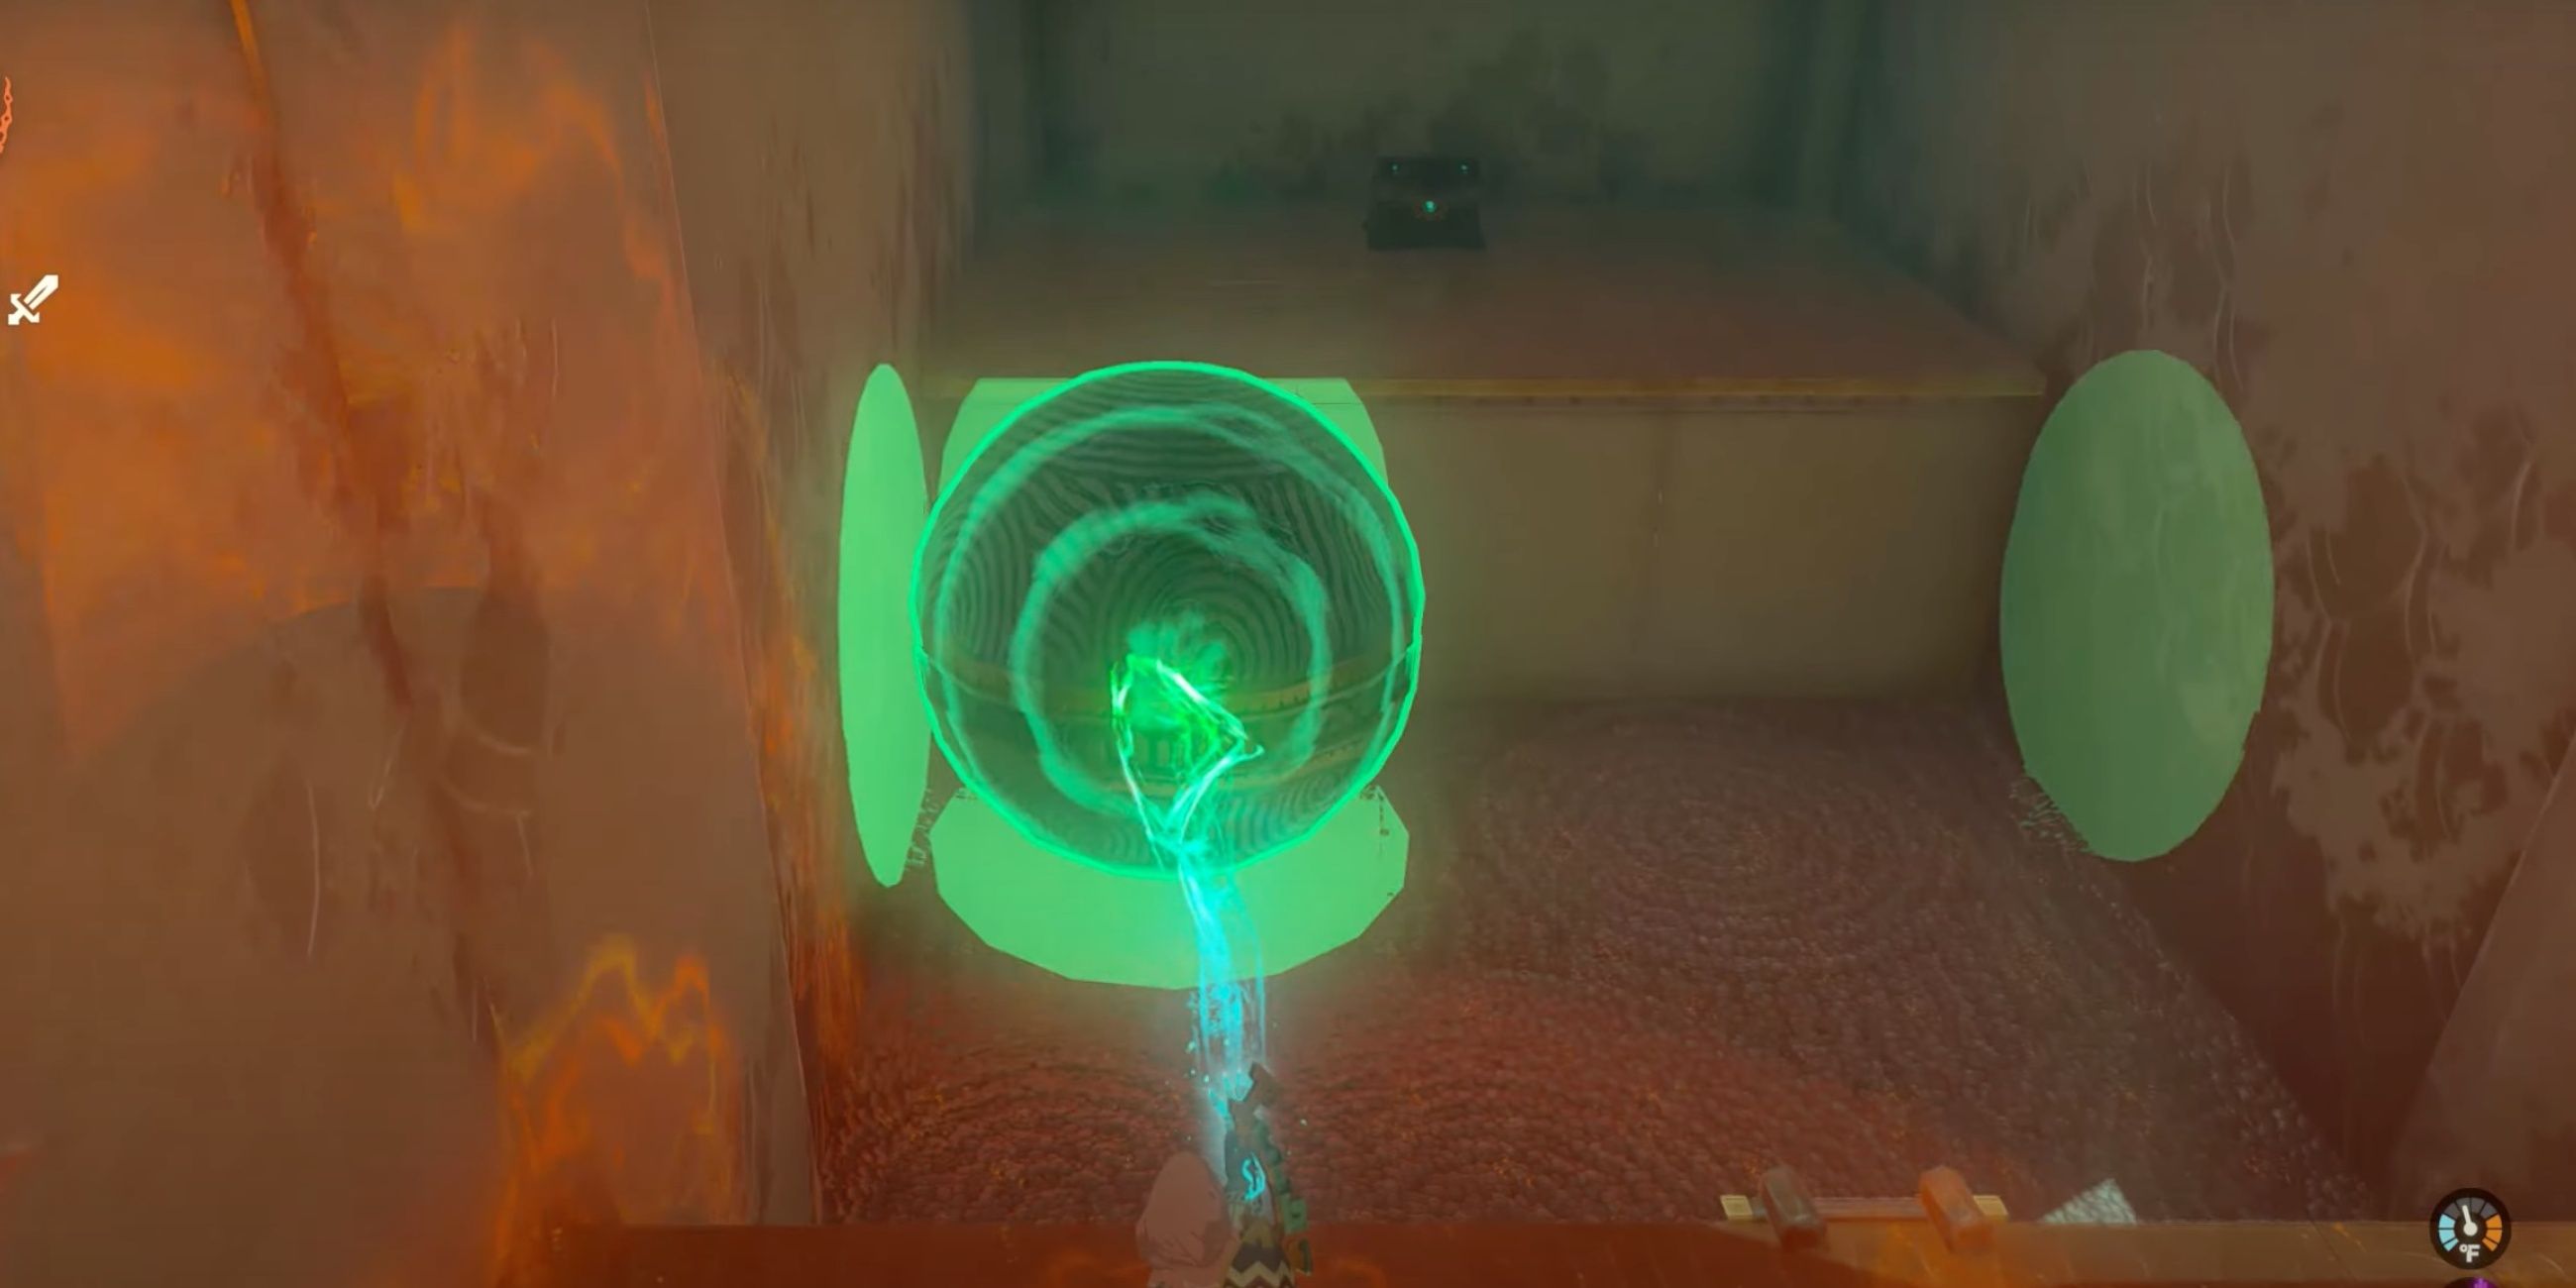 In The Legend of Zelda: Tears of the Kingdom, Link brings the ball closer to the Mayamat shrine treasure chest.